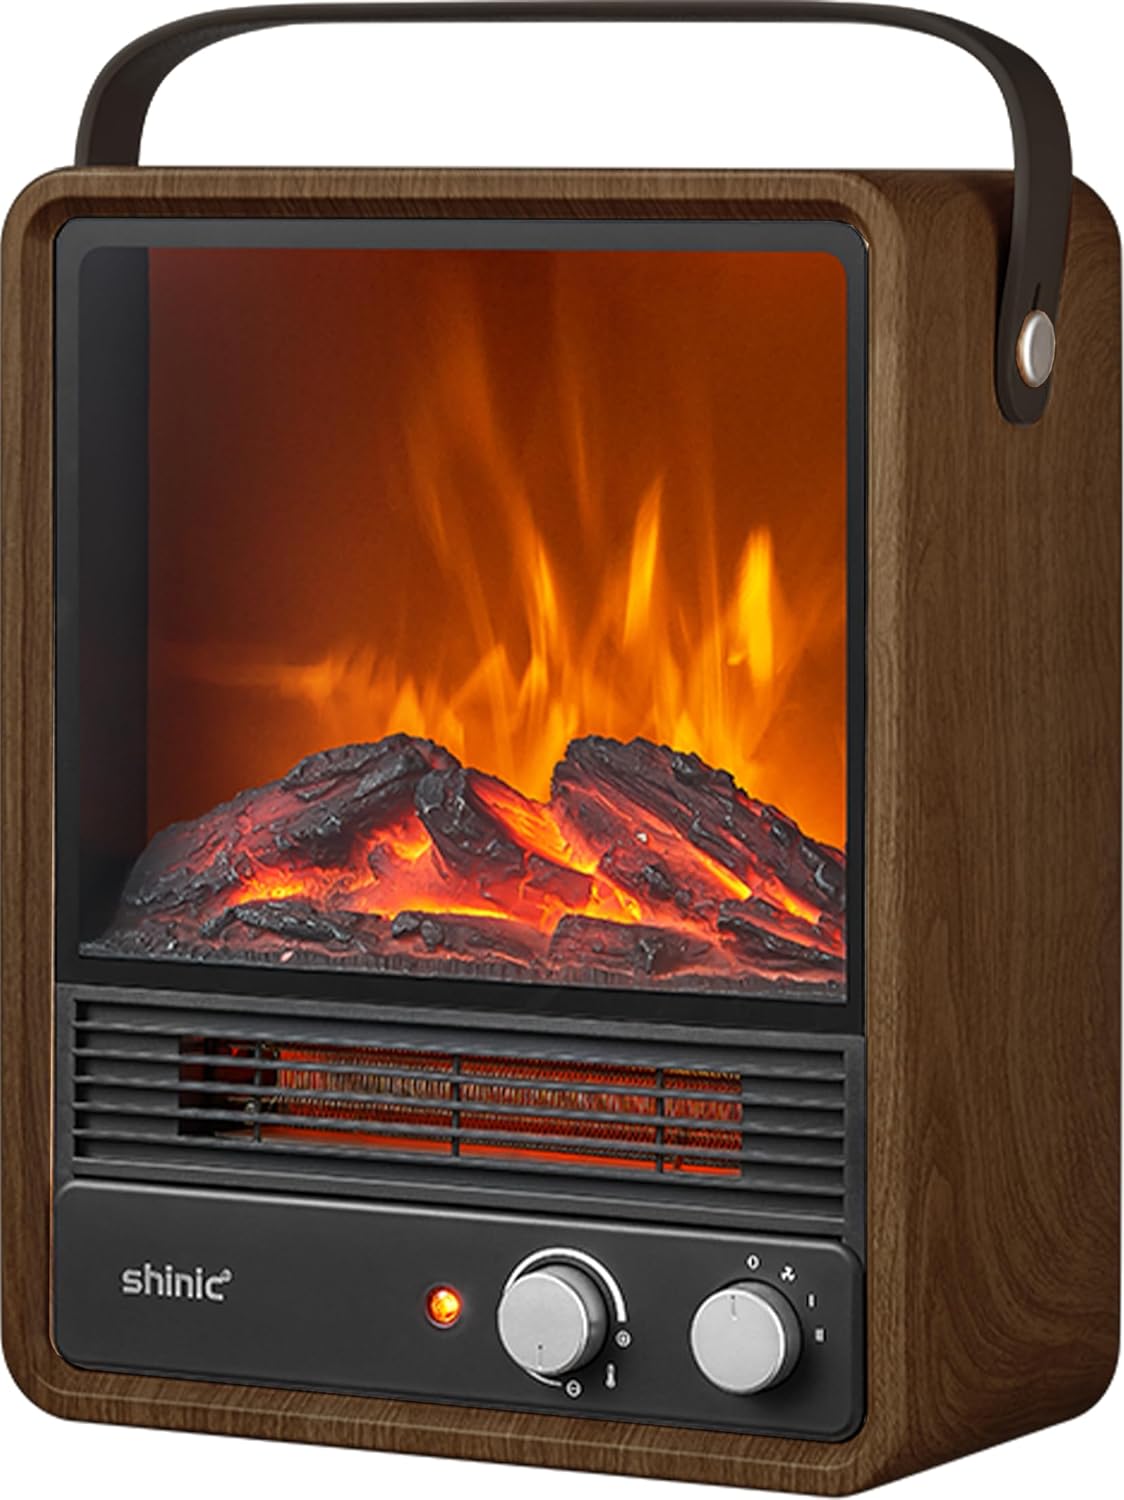 Time-Sensitive Deal: Electric Fireplace Heaters for Indoor Use - Save 18%